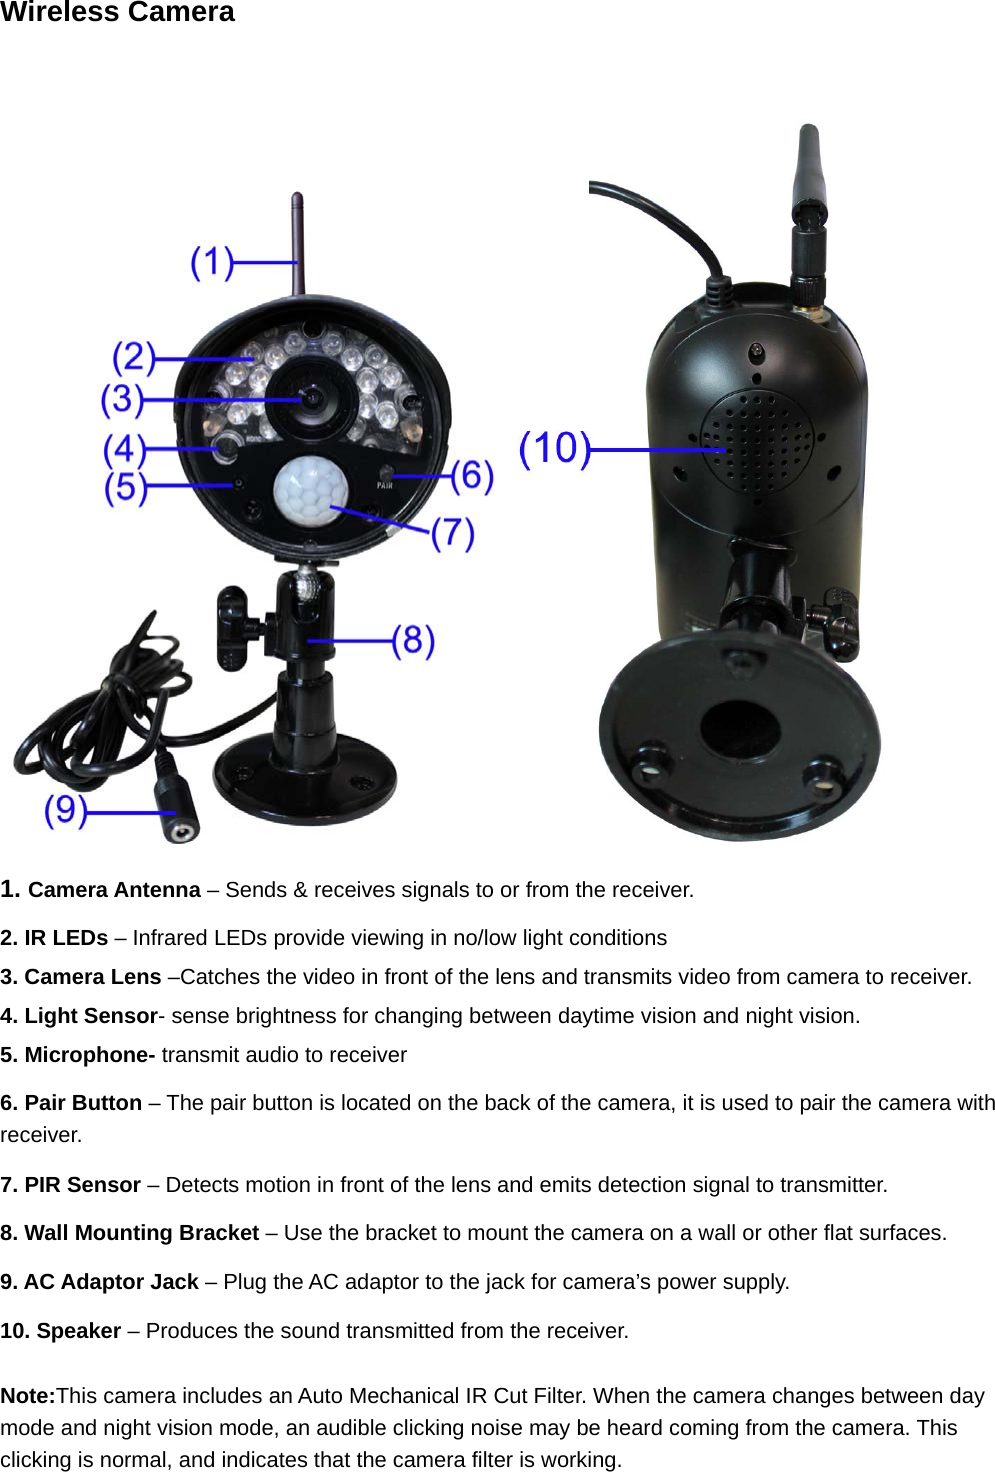 Wireless Camera   1. Camera Antenna – Sends &amp; receives signals to or from the receiver.  2. IR LEDs – Infrared LEDs provide viewing in no/low light conditions 3. Camera Lens –Catches the video in front of the lens and transmits video from camera to receiver.   4. Light Sensor- sense brightness for changing between daytime vision and night vision.   5. Microphone- transmit audio to receiver 6. Pair Button – The pair button is located on the back of the camera, it is used to pair the camera with receiver. 7. PIR Sensor – Detects motion in front of the lens and emits detection signal to transmitter. 8. Wall Mounting Bracket – Use the bracket to mount the camera on a wall or other flat surfaces. 9. AC Adaptor Jack – Plug the AC adaptor to the jack for camera’s power supply. 10. Speaker – Produces the sound transmitted from the receiver.   Note:This camera includes an Auto Mechanical IR Cut Filter. When the camera changes between day mode and night vision mode, an audible clicking noise may be heard coming from the camera. This clicking is normal, and indicates that the camera filter is working. 